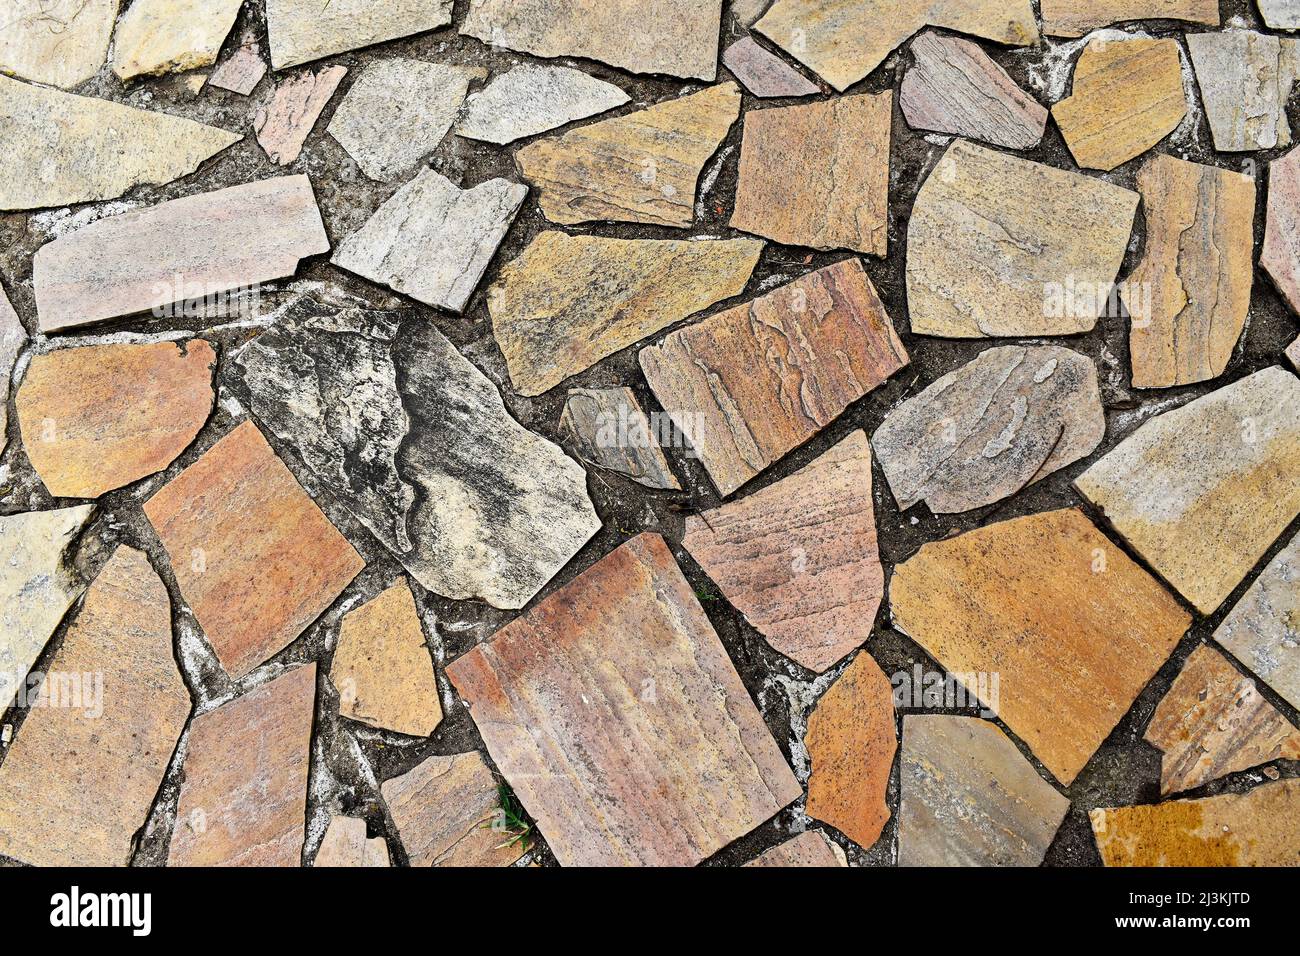 Paving stones detail in the square, Rio Stock Photo